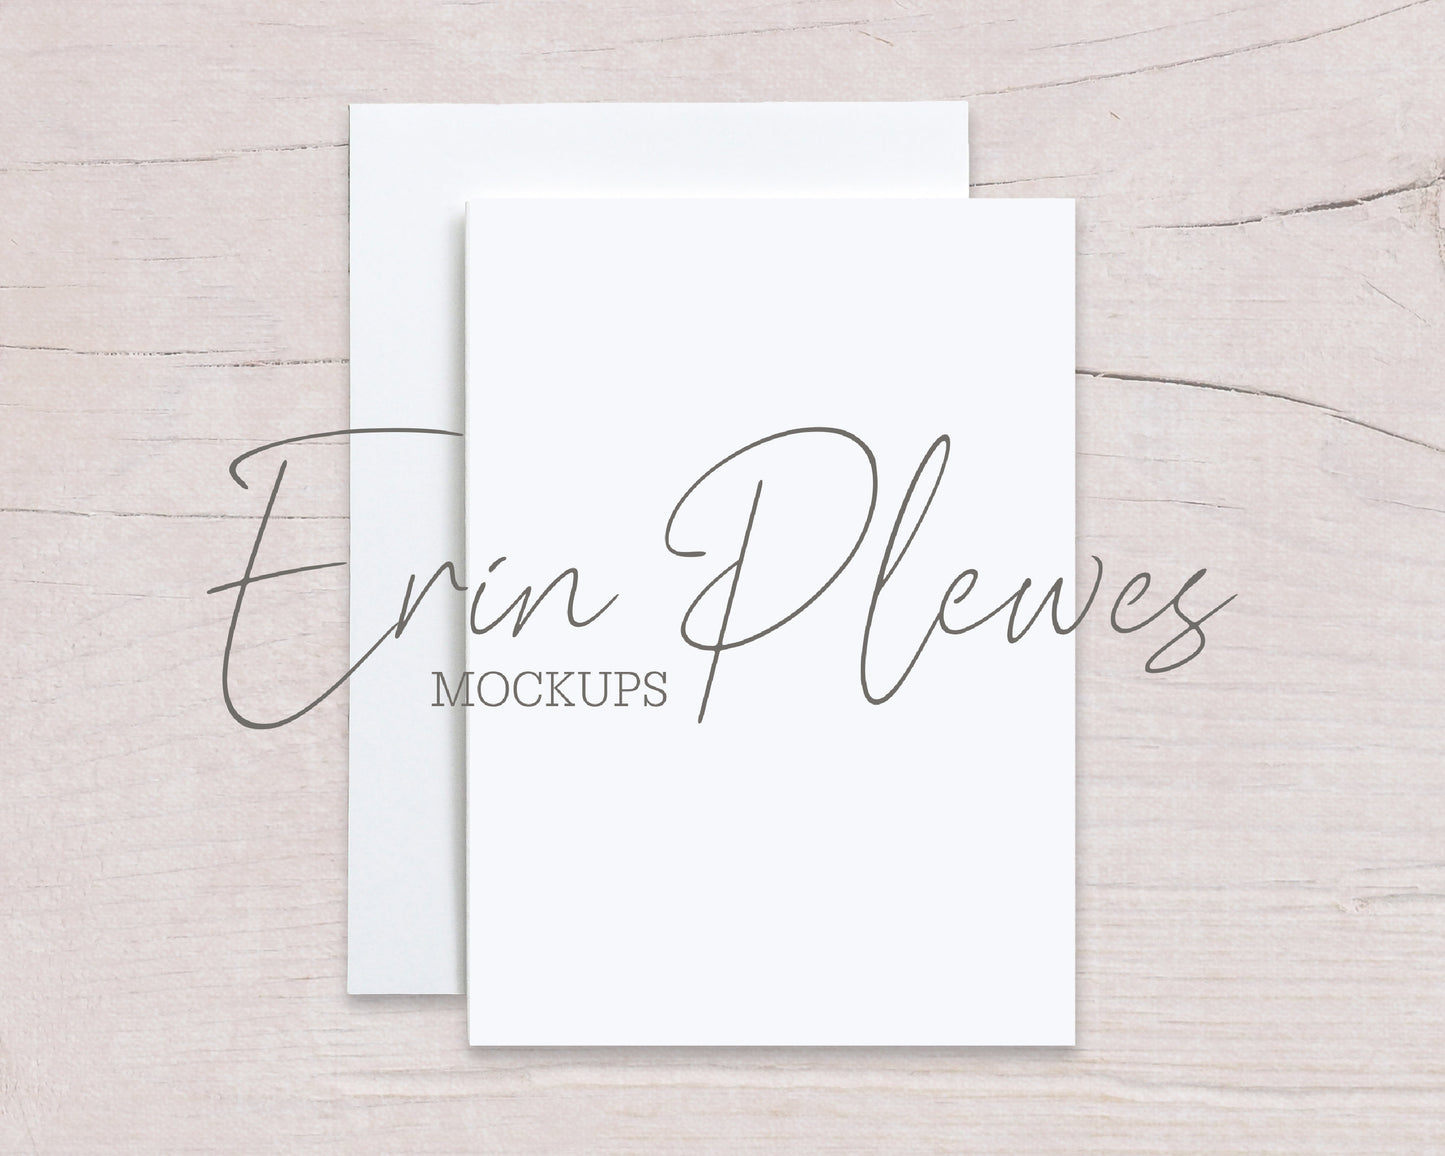 5x7 Card Mockup with White Envelope on Beige Wood, Thank You Card Mock Up, Invite Flat Lay for Rustic Wedding, Jpeg Instant Digital Download